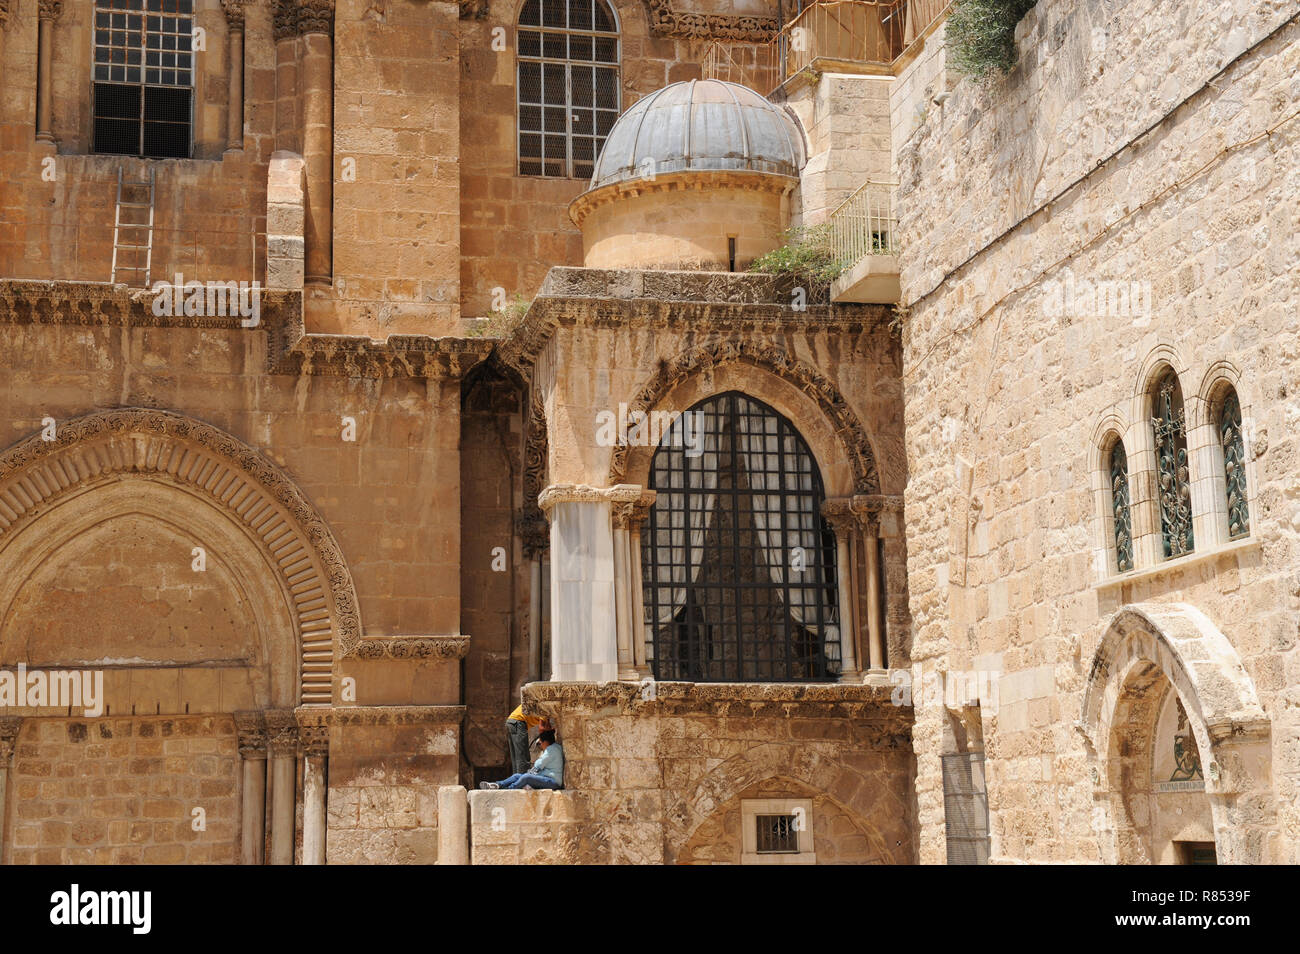 Part of Church of Holy Sepulchre in Christian Quarters of the old city of Jerusalem Israel being the most important Pilgrimage centre of the Bible. Stock Photo